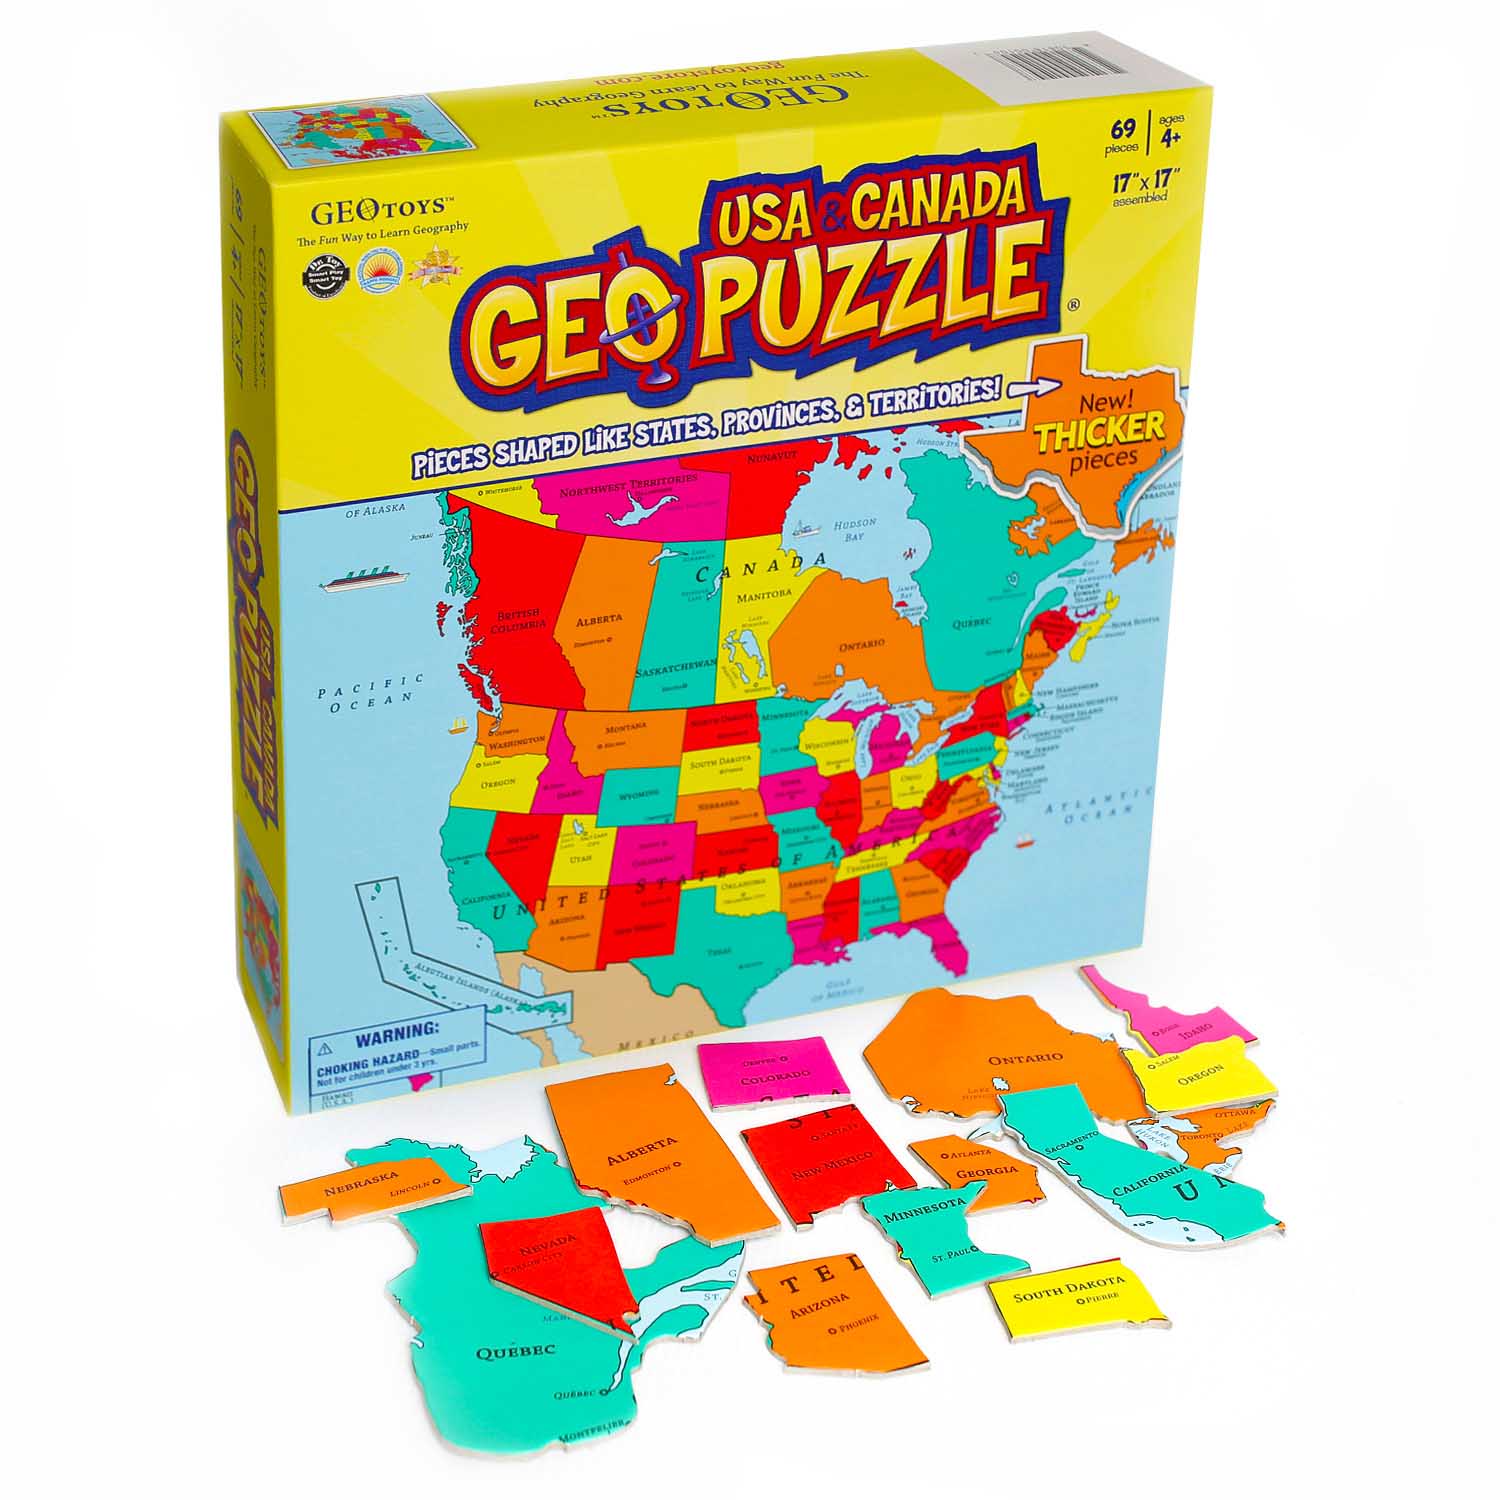 United States & Canada Maps & Geography Jigsaw Puzzle